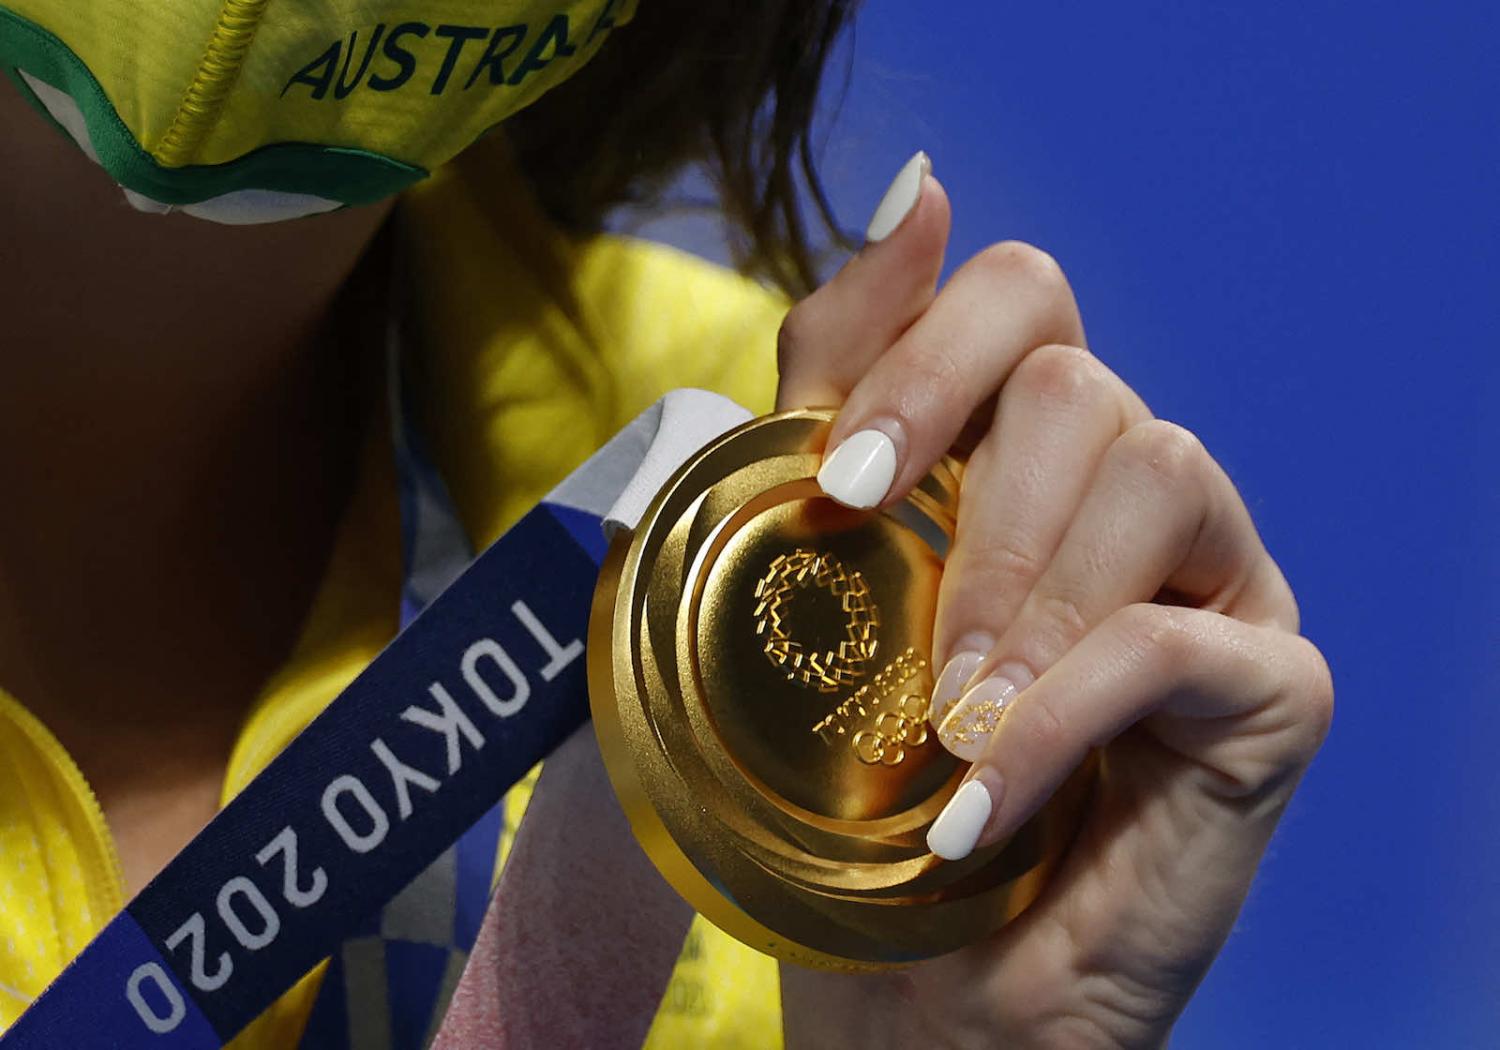 Australia’s Kaylee McKeown holds up her gold medal after the final of the women’s 100 metre backstroke swimming event at the Tokyo 2020 Olympic Games (Odd Andersen/AFP via Getty Images)